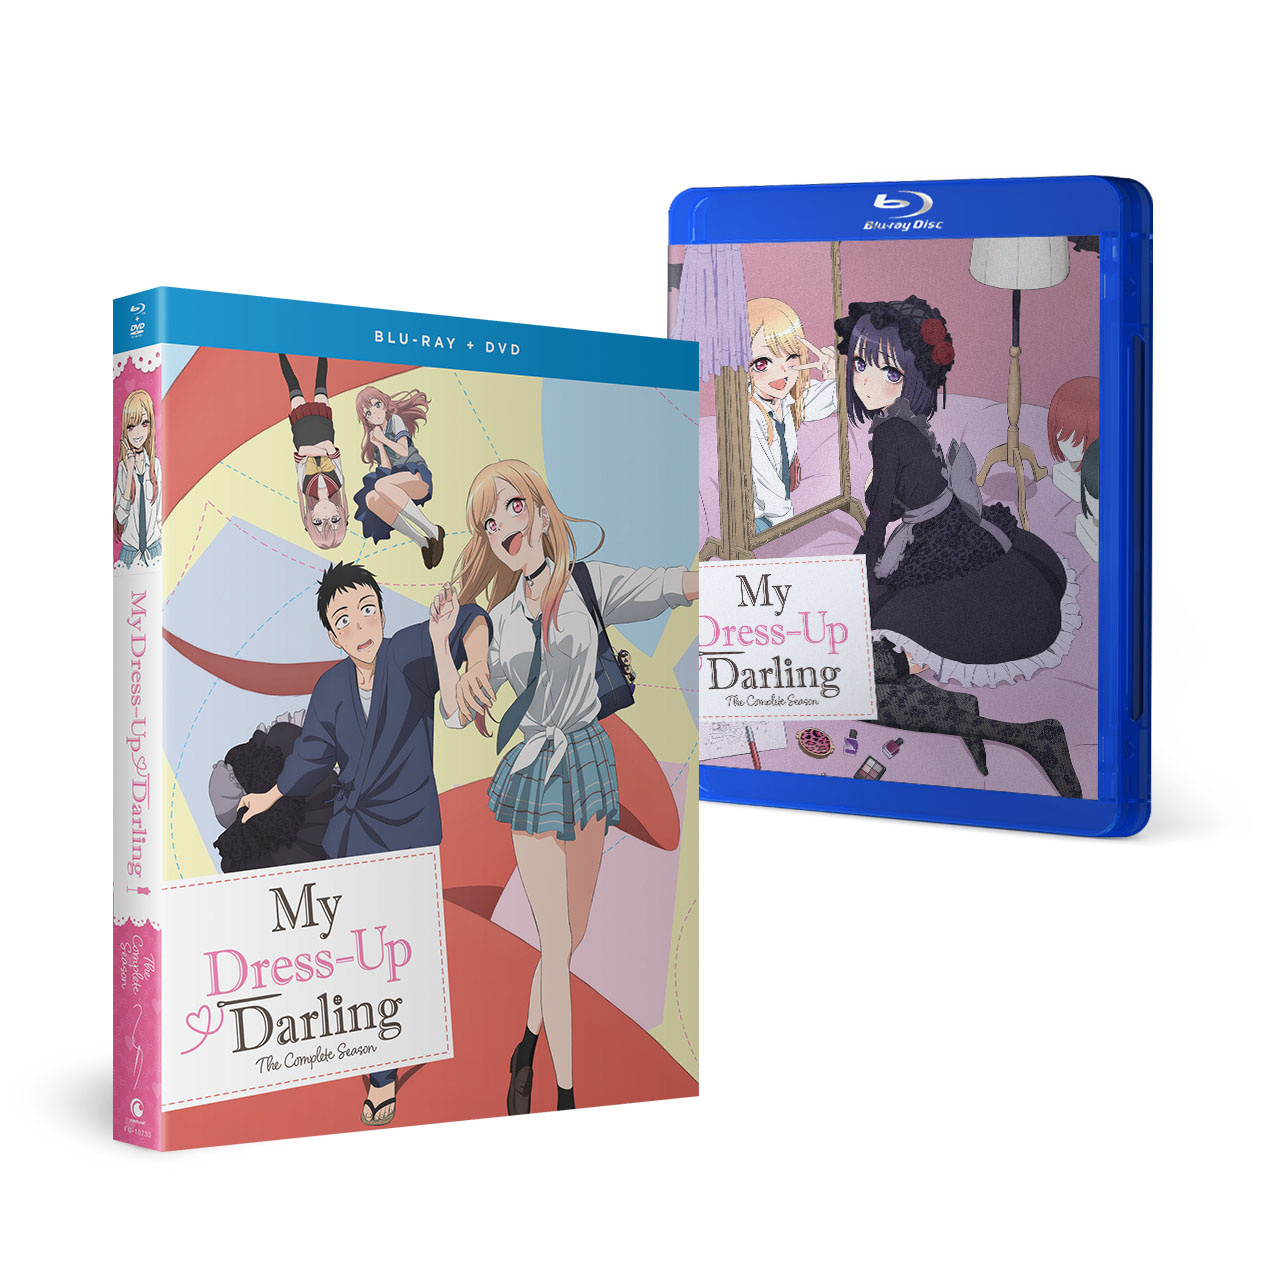 My Dress Up Darling - The Complete Season - Blu-ray + DVD image count 0